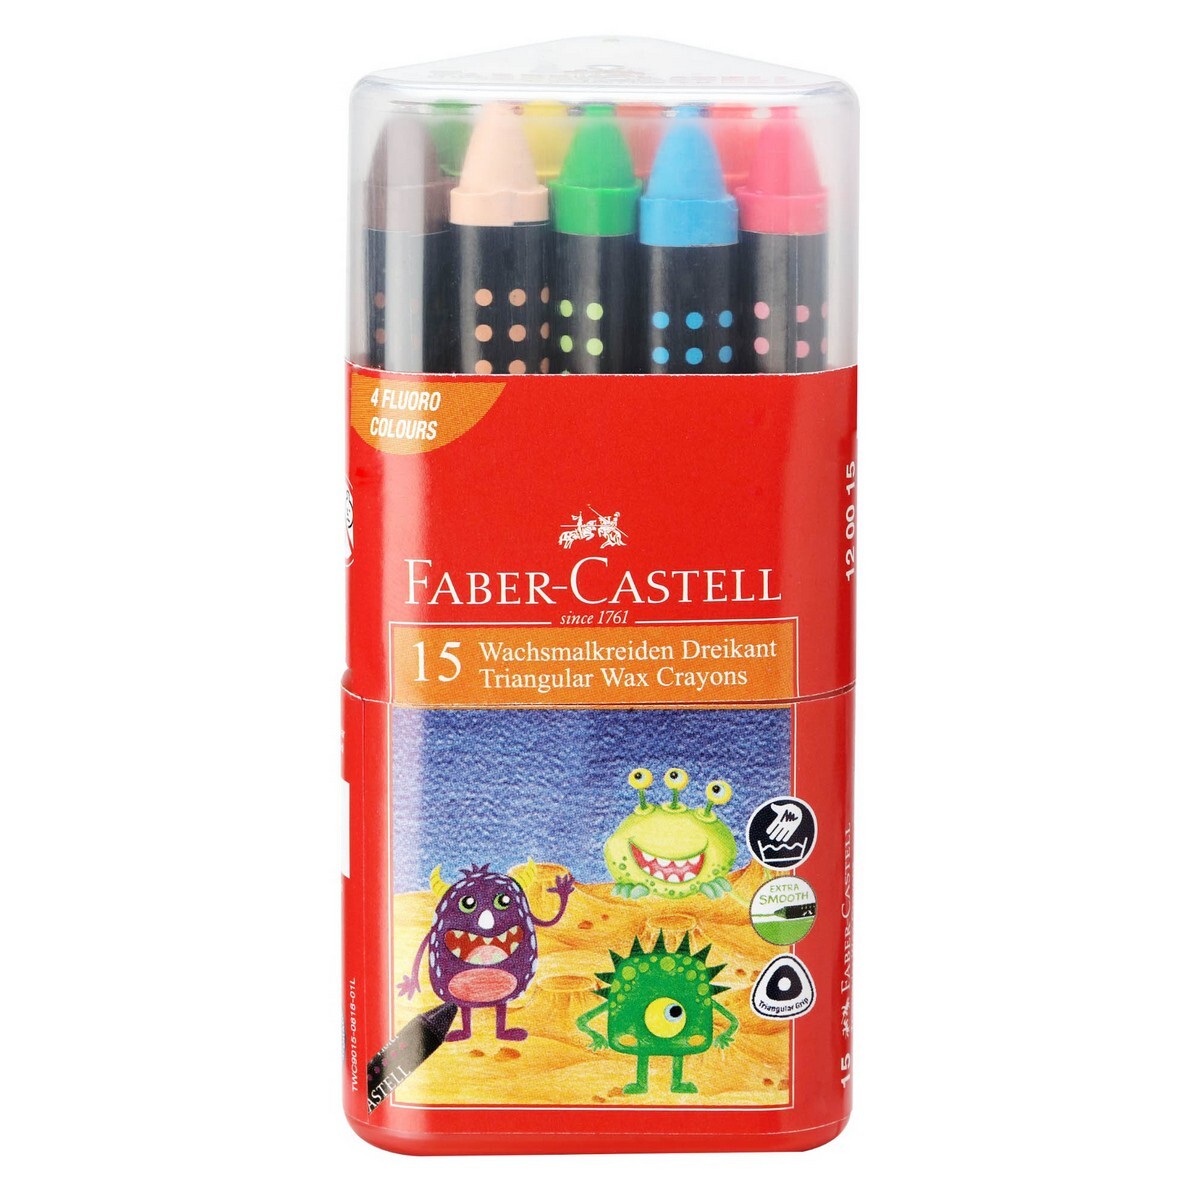 Faber Castell Triangle Wax Crayon 15Pcs 120016